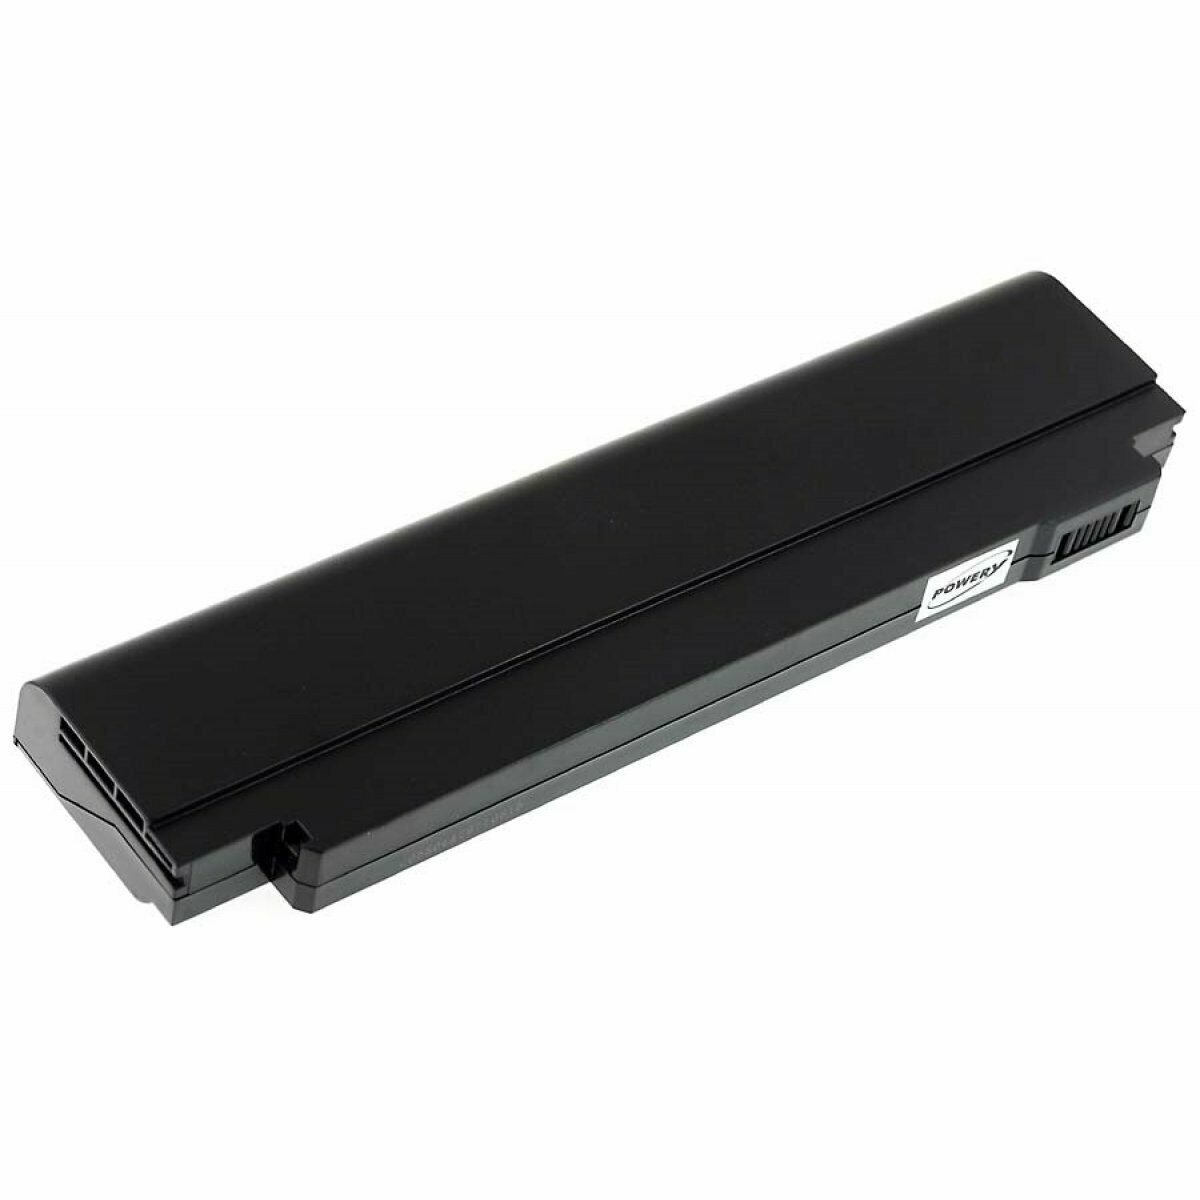 Depo VIP C8515 BP3S2P2150,P/N: 441825900006,9225P compatible battery